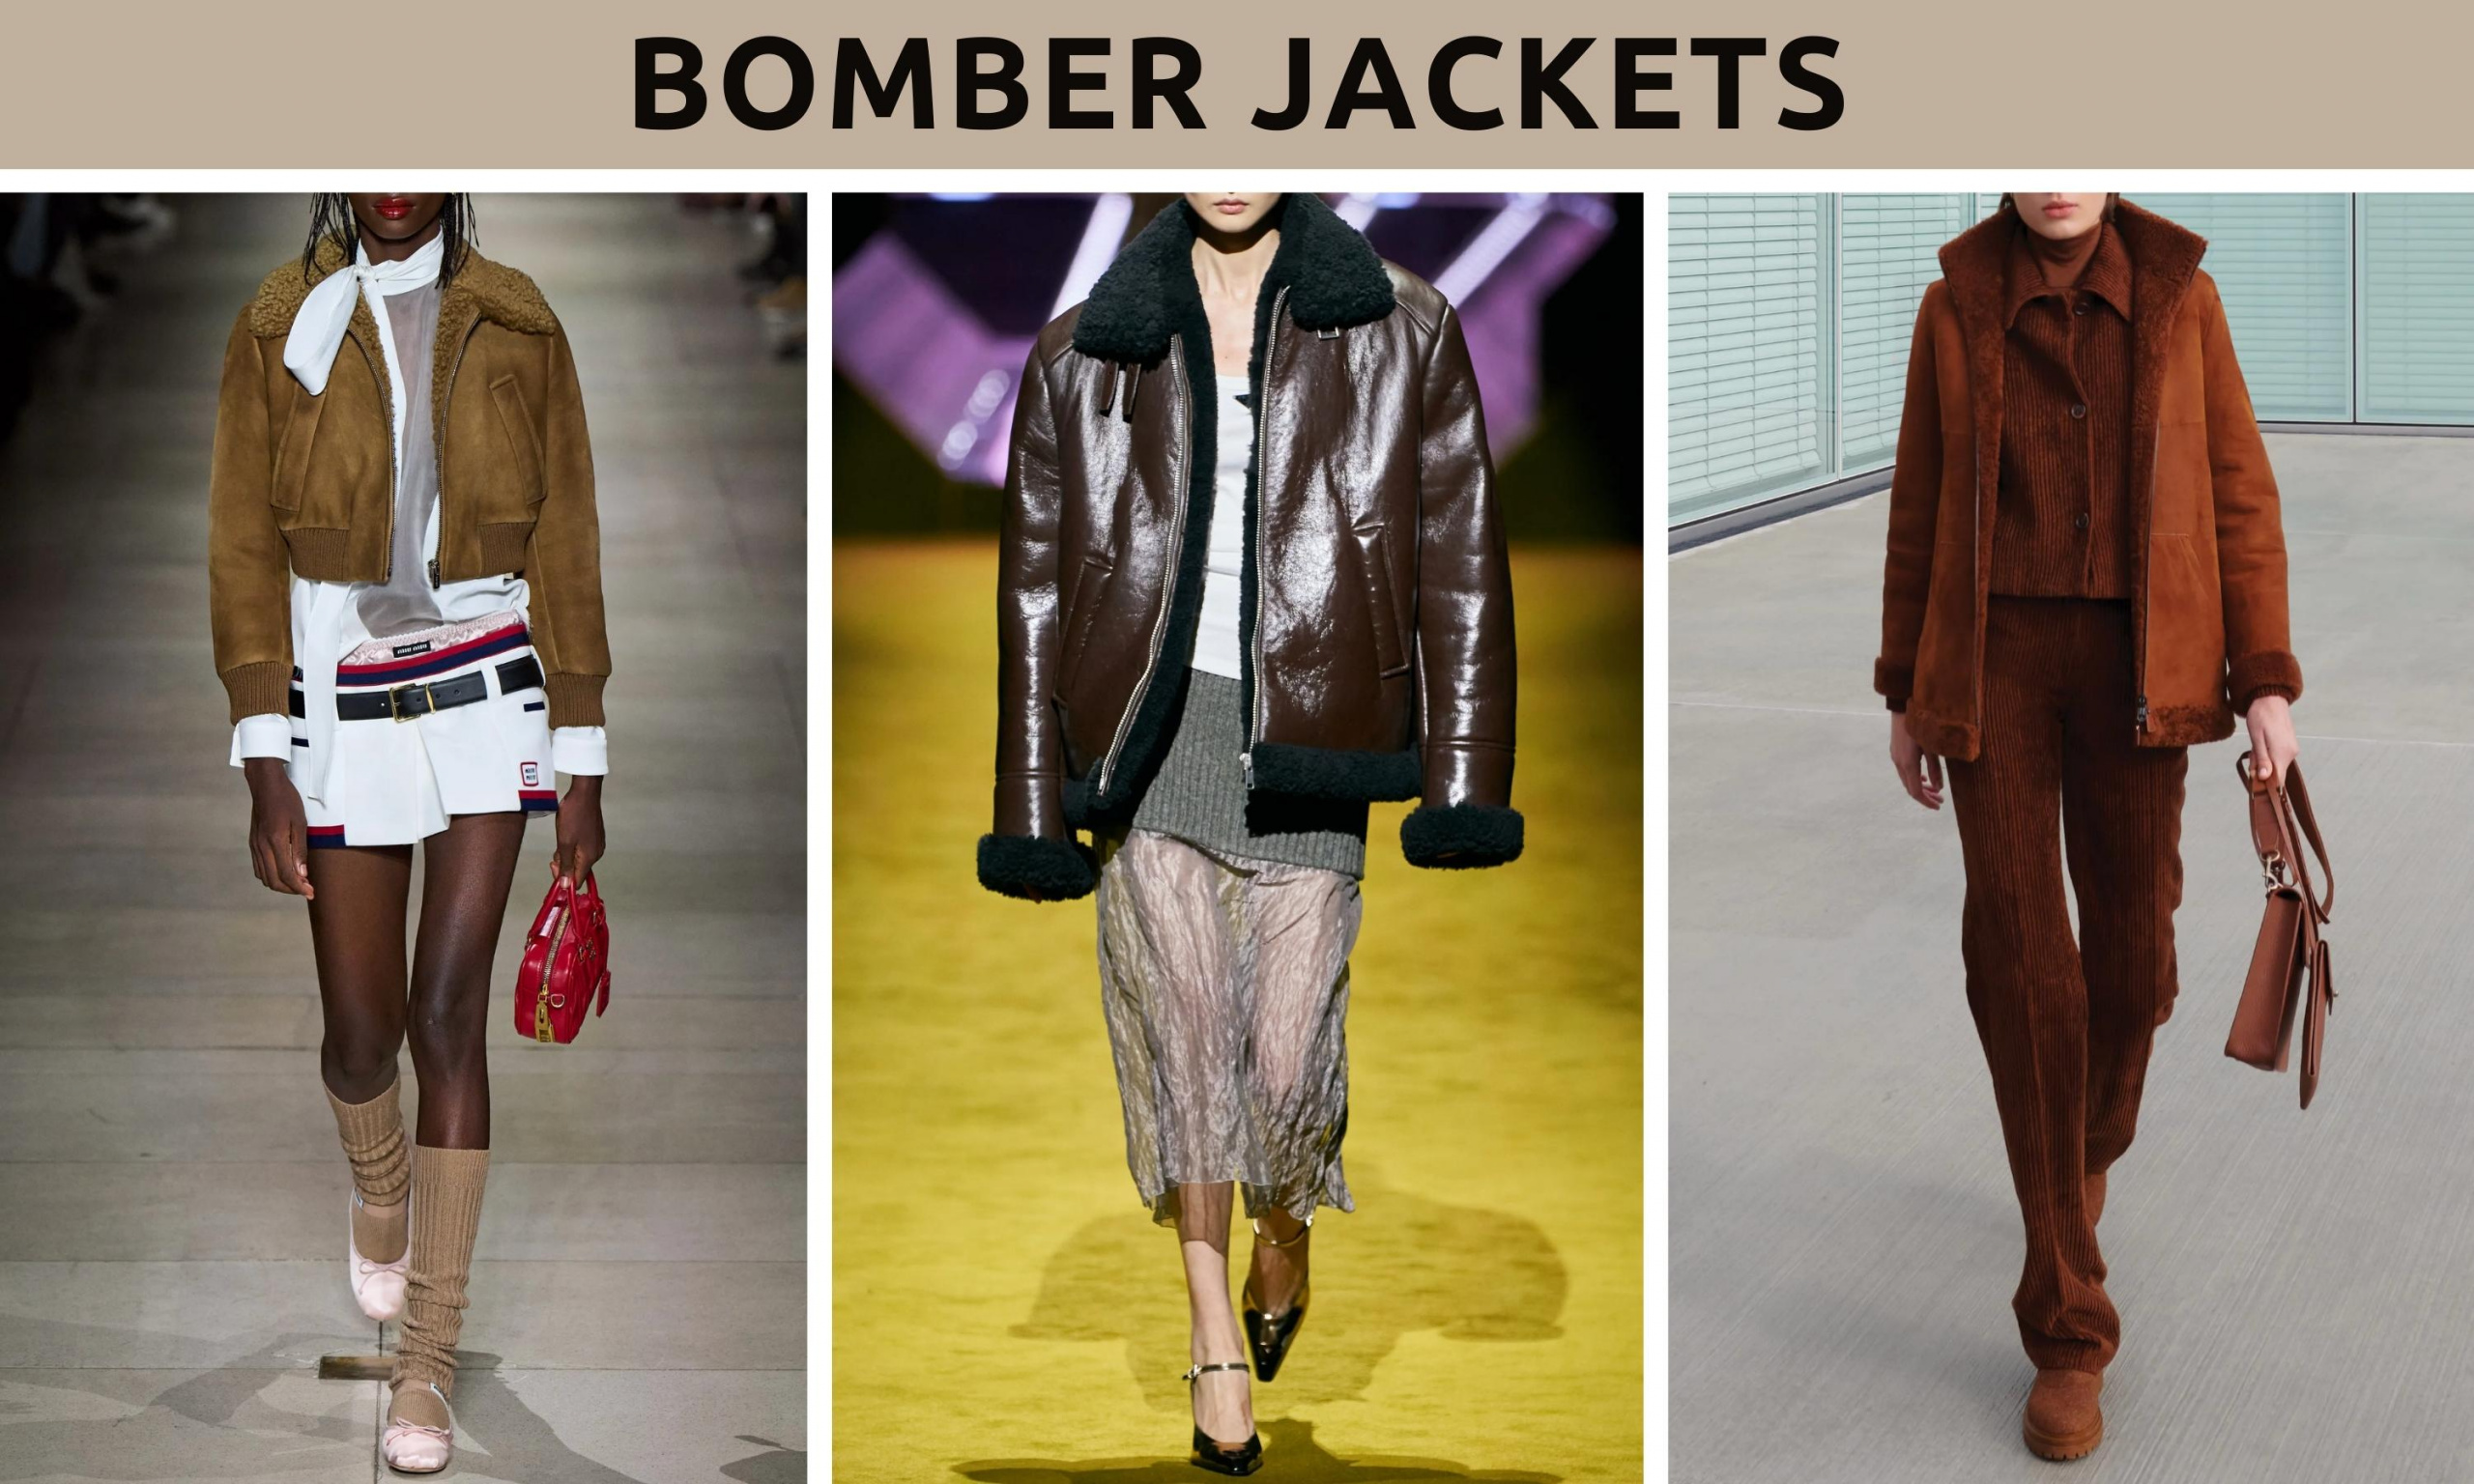 wearable fall trends, fall fashion trends, fall trends, wearable trends, how to wear trends, trends over 40, wearing trends over 40, 2022 fall fashion trends, 2022 wearable fall trends, bomber jackets, outerwear trends